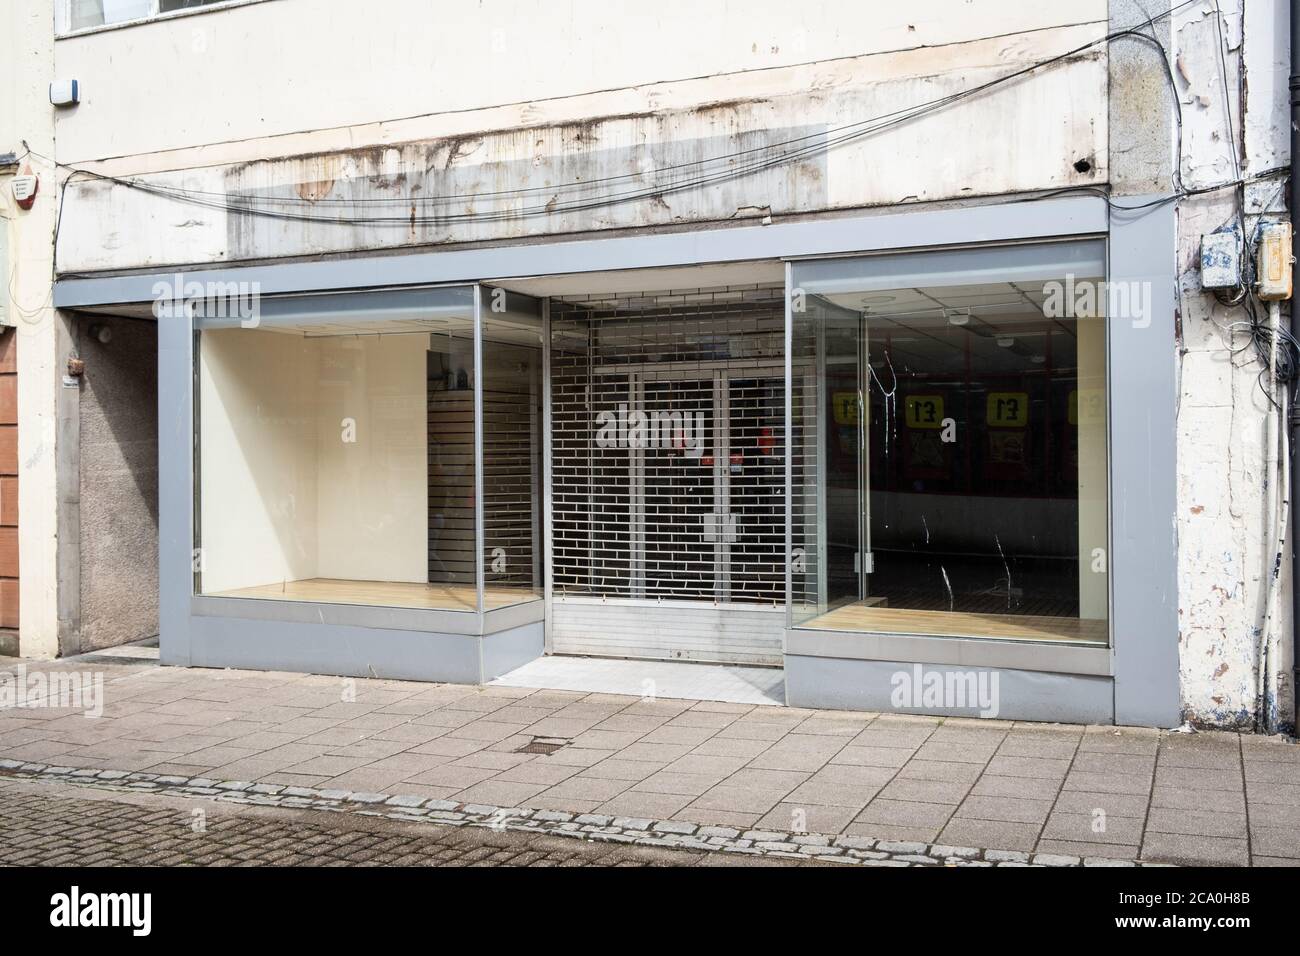 The Ryman stationery store in Dumfries, Scotland, closed after nearly 25 years in the town.  The store closed due to covid 19 but could not reopen. Stock Photo